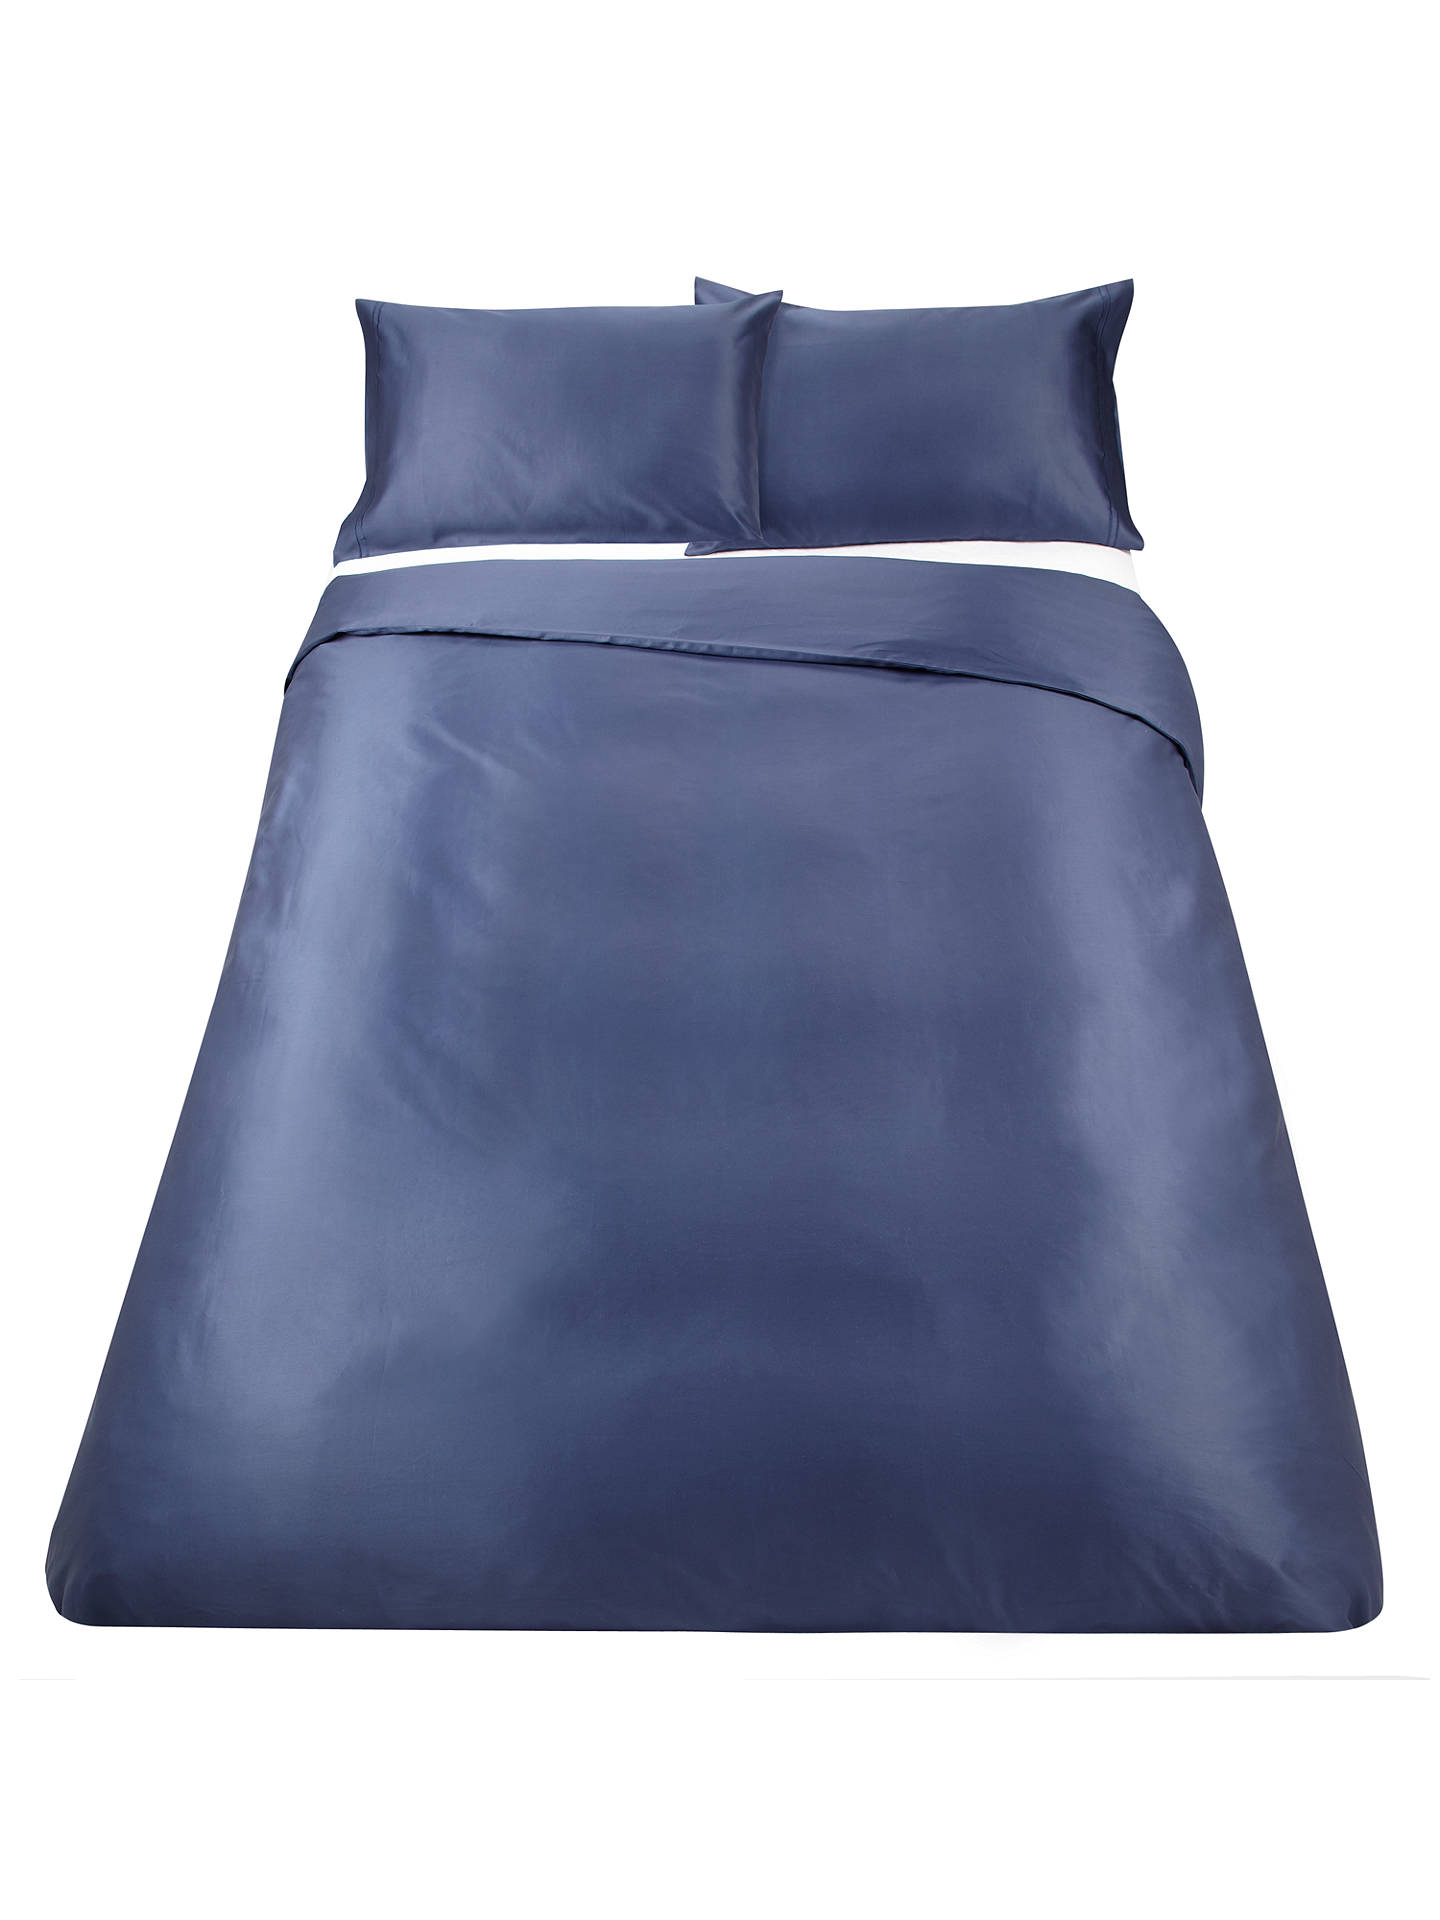 John Lewis Partners The Ultimate Collection 1000 Thread Count